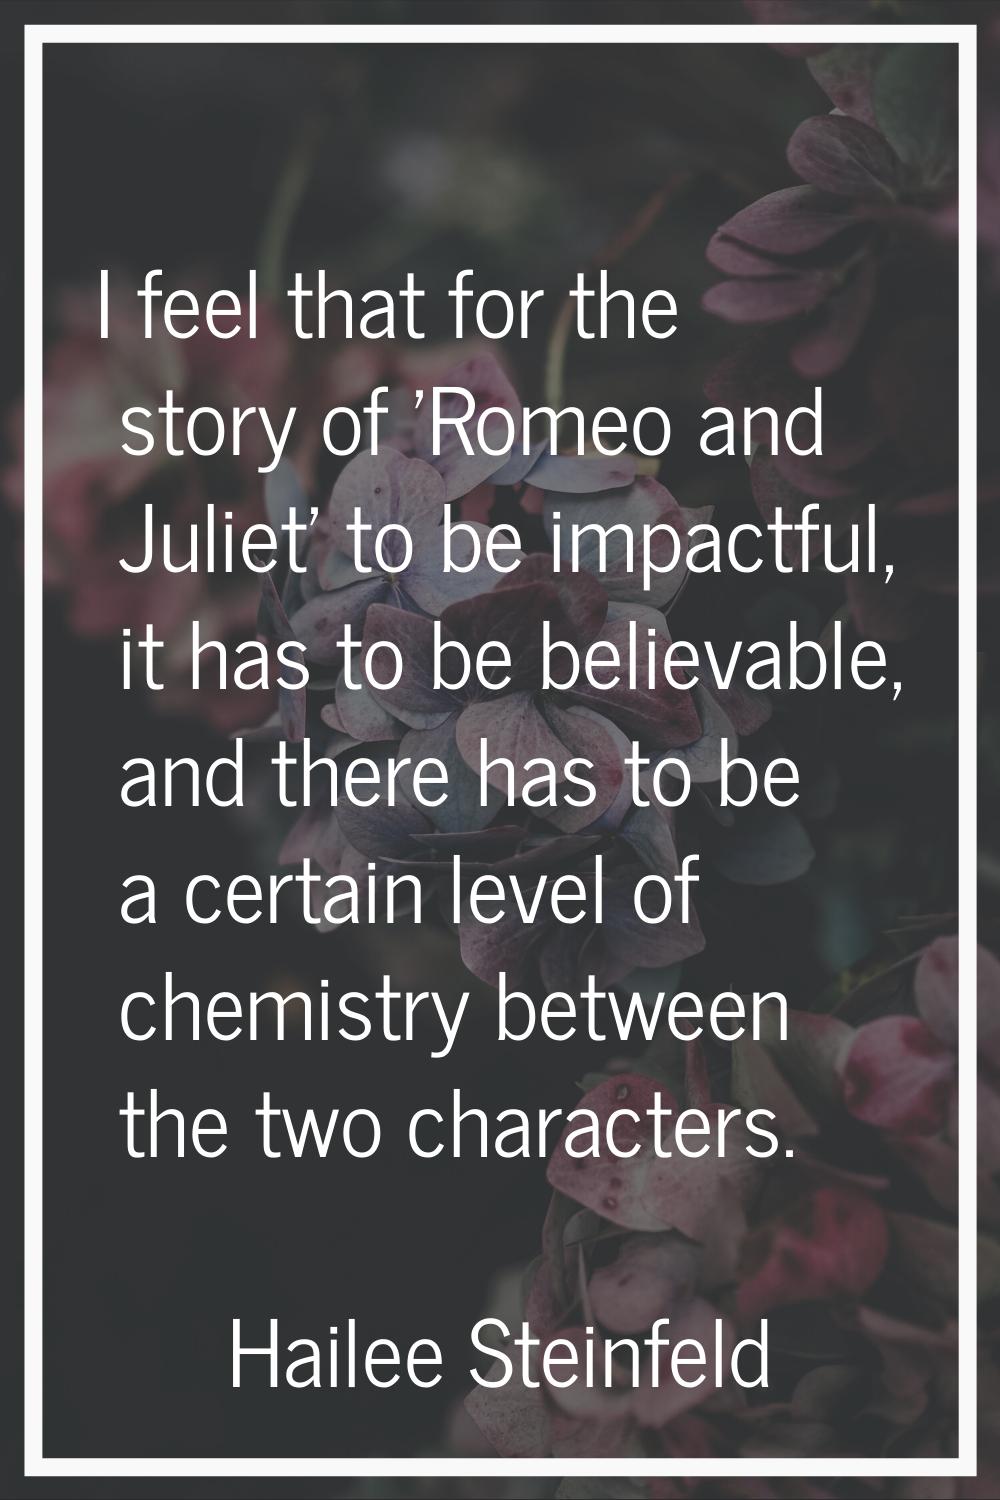 I feel that for the story of 'Romeo and Juliet' to be impactful, it has to be believable, and there